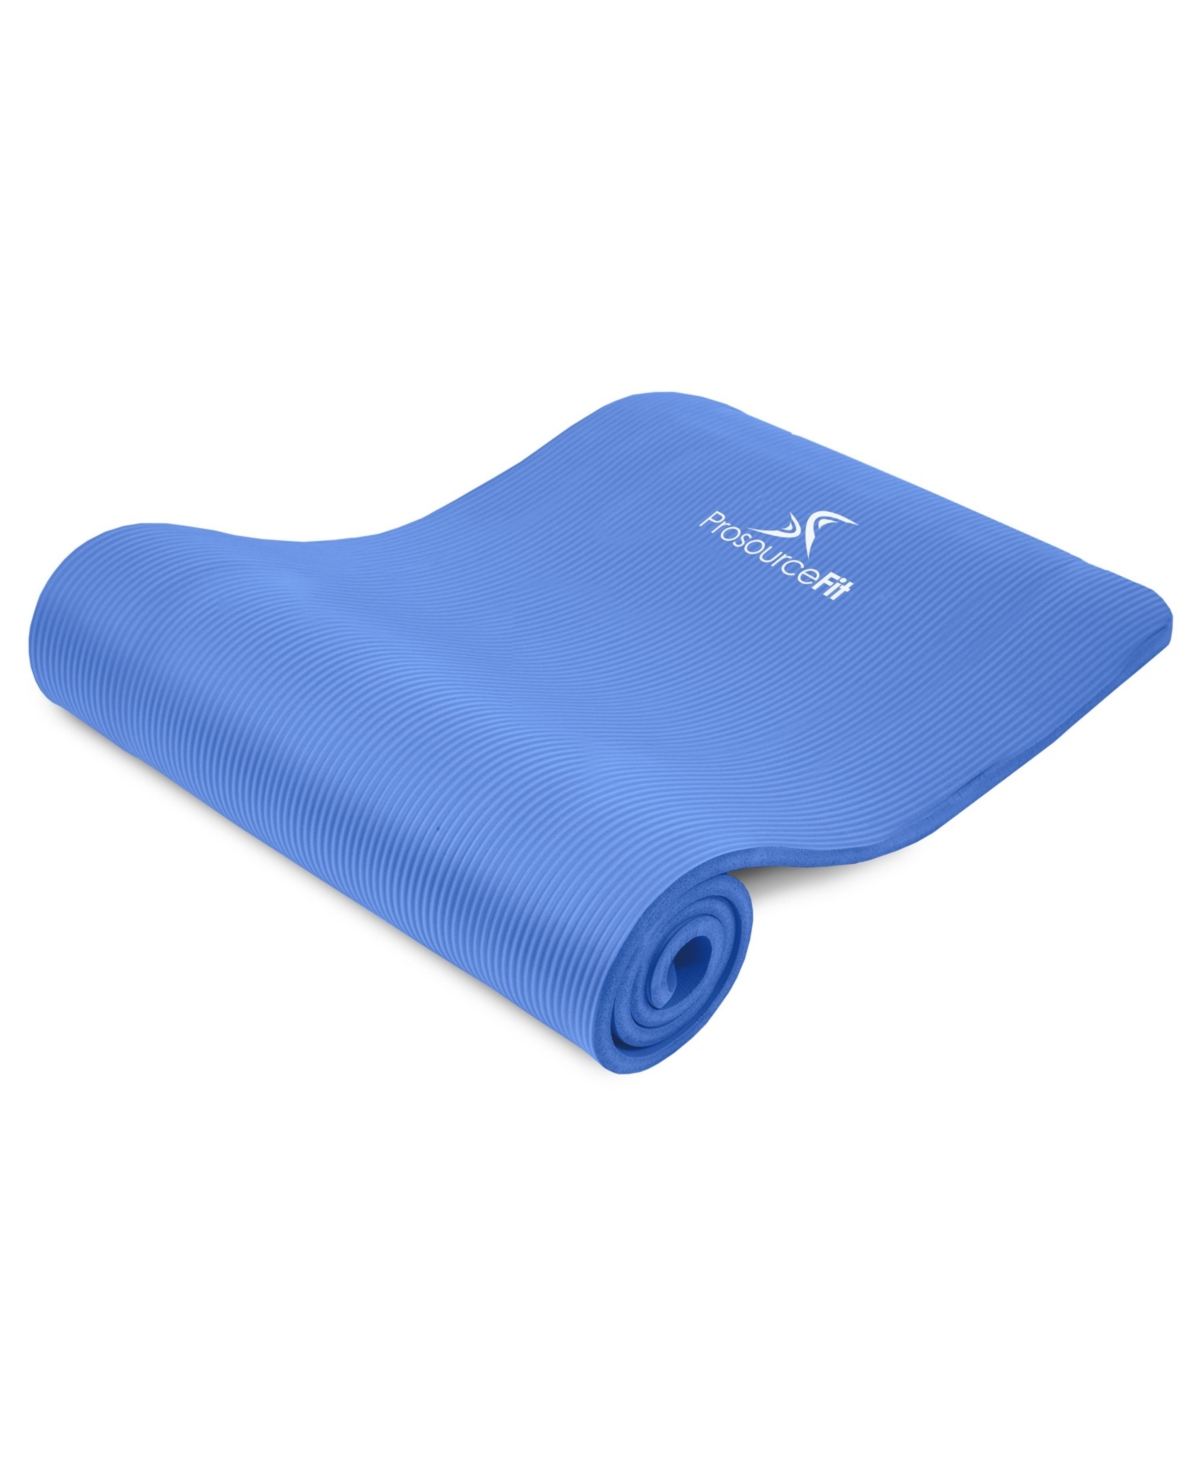 Extra Thick Yoga and Pilates Mat with Sling, 1" - Aqua